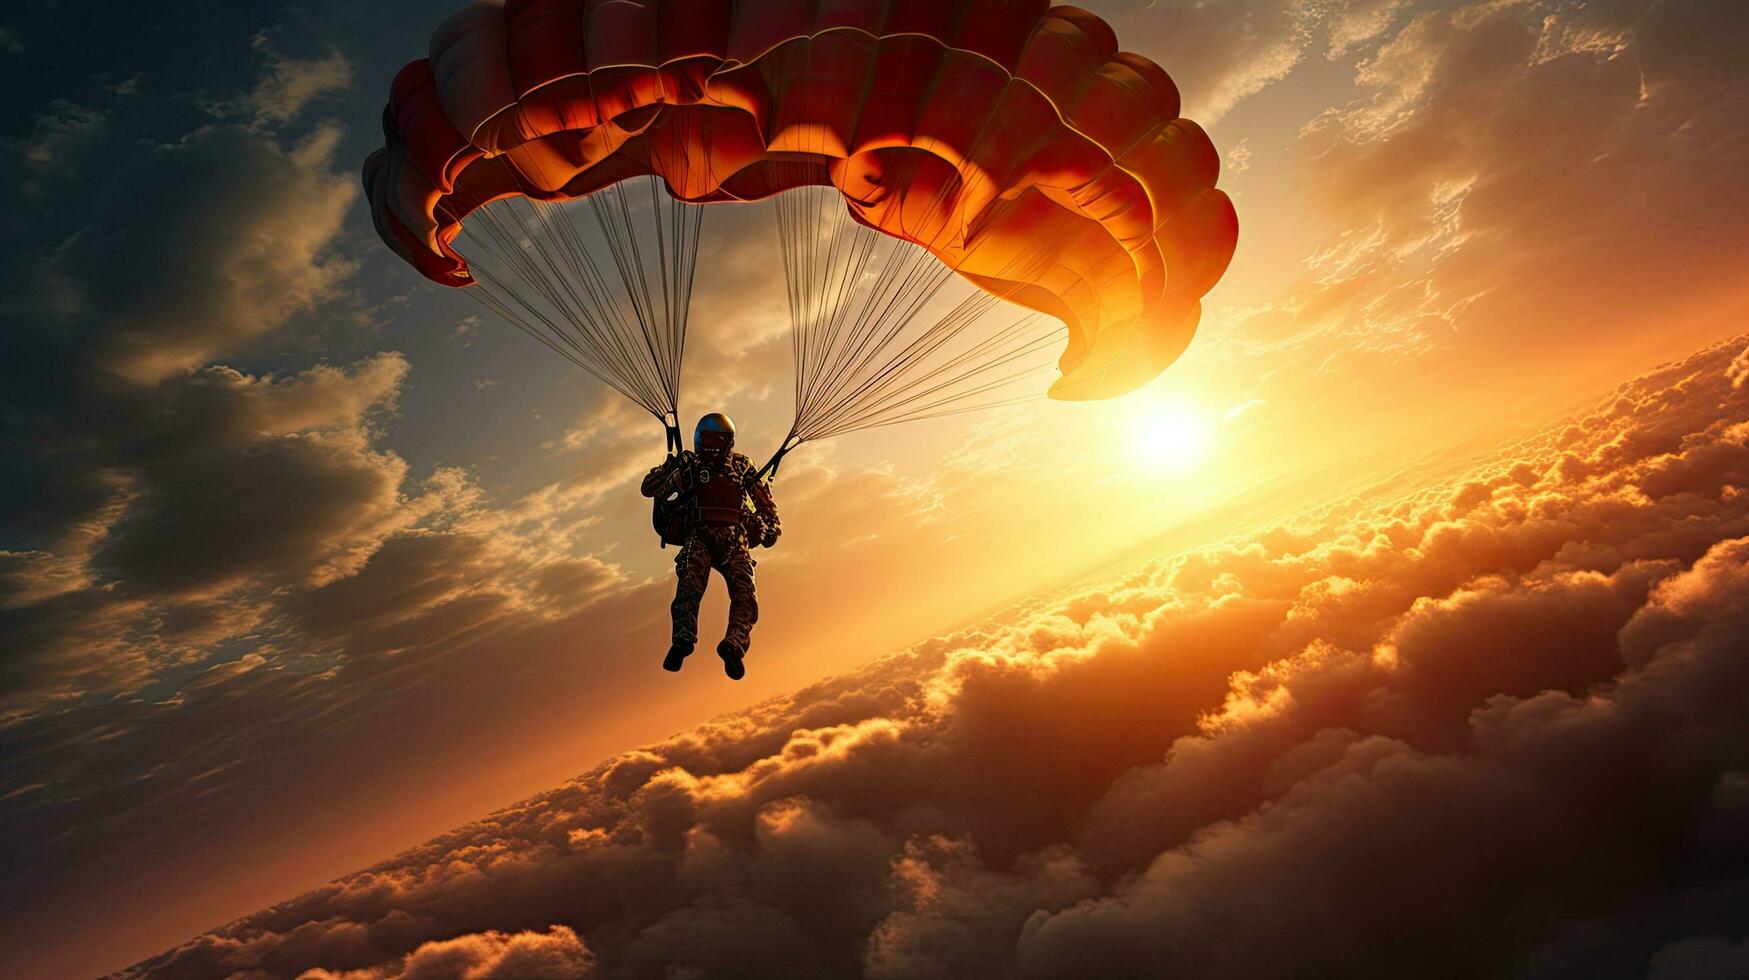 A solitary parachuter gracefully glides through the vibrant sky outlined by the setting sun photo